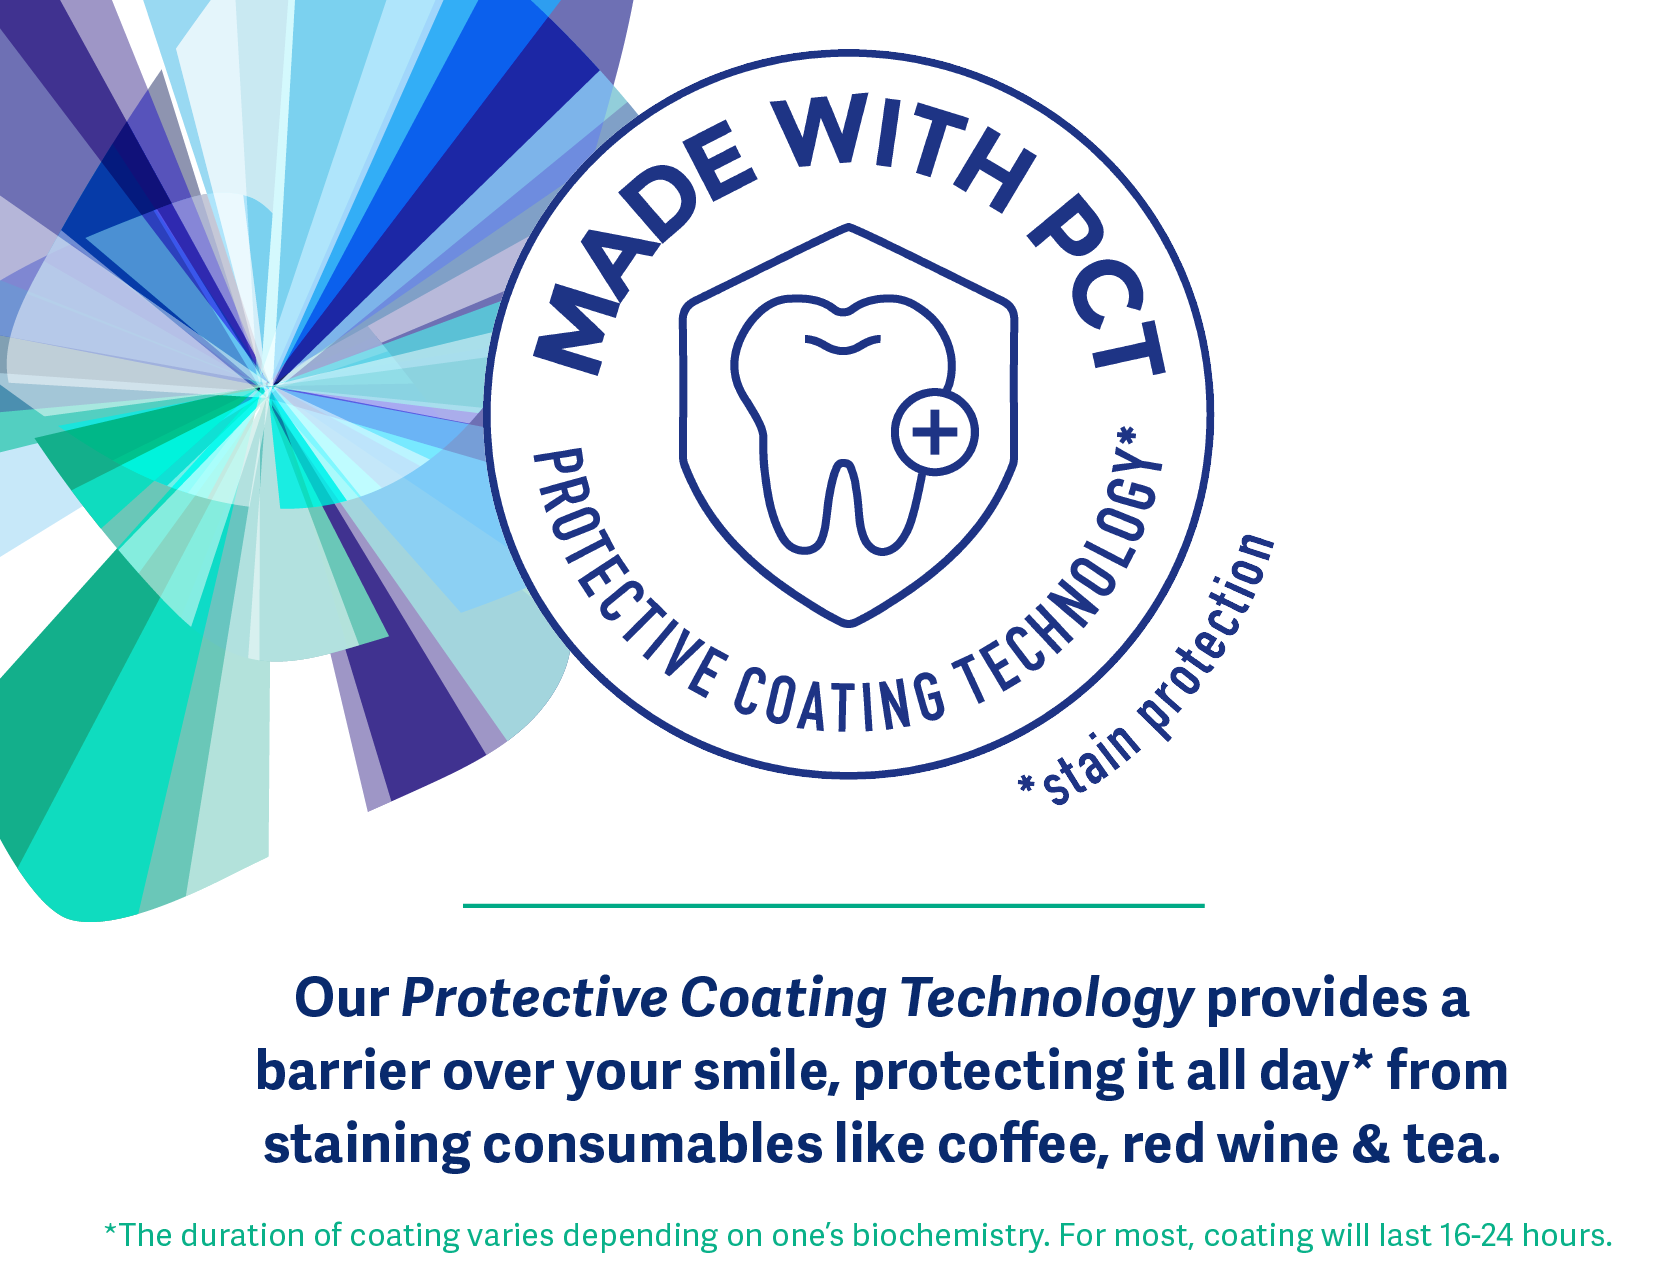 Halo Smile Stain Protectoin: Protective Coating Technology for preventing teeth stains